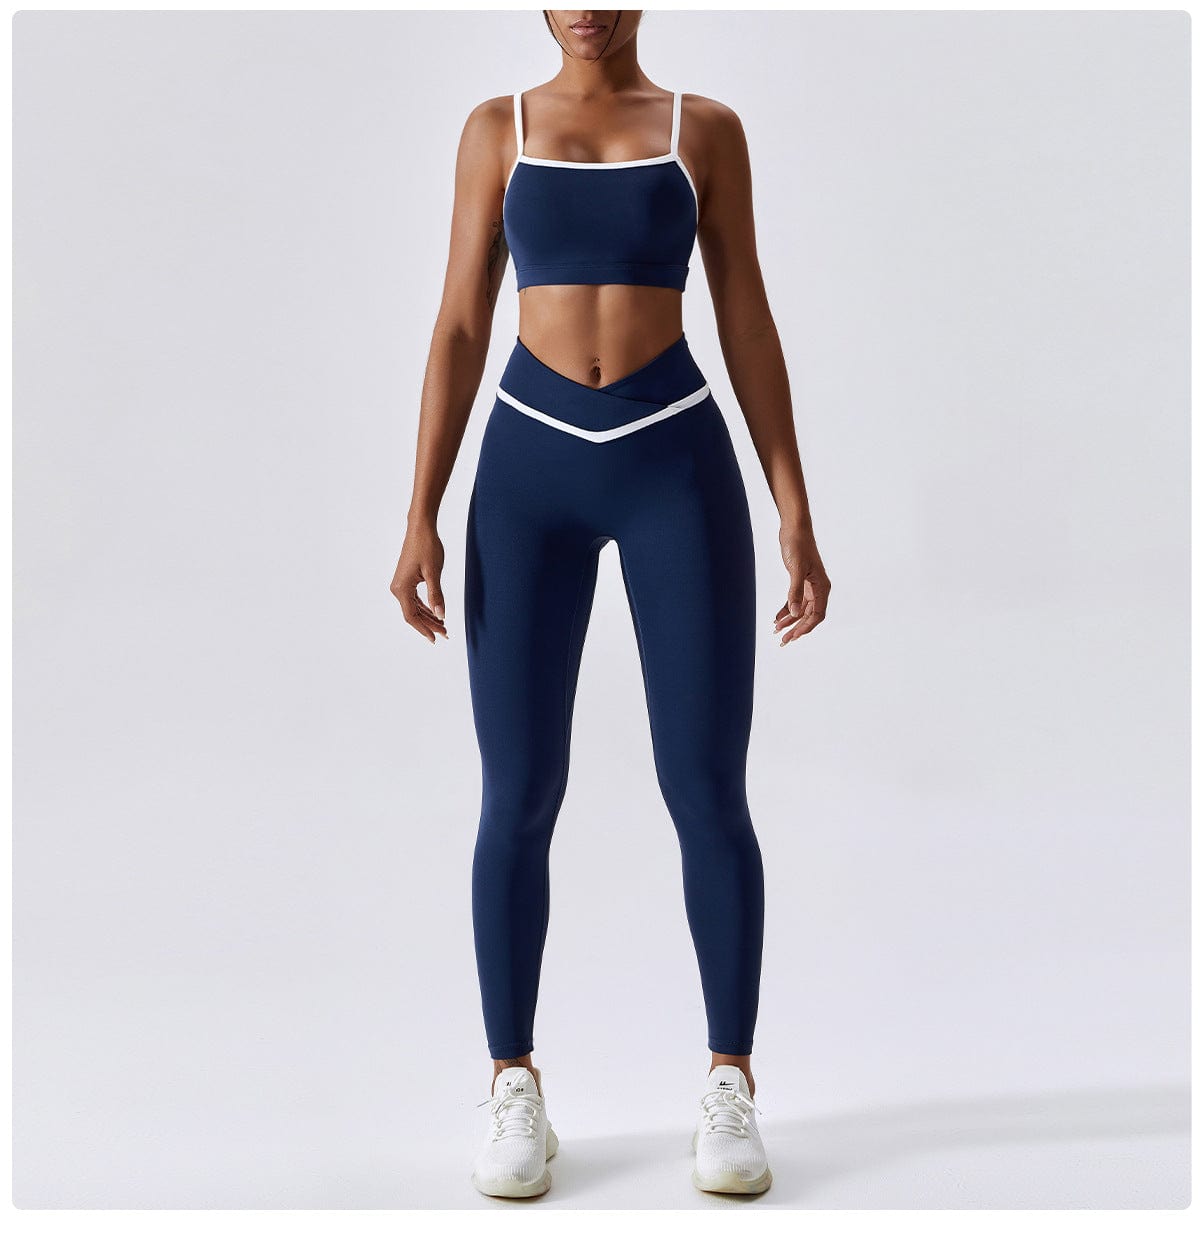 How Many Sets of Workout Clothes Do I Need? — Shopping on